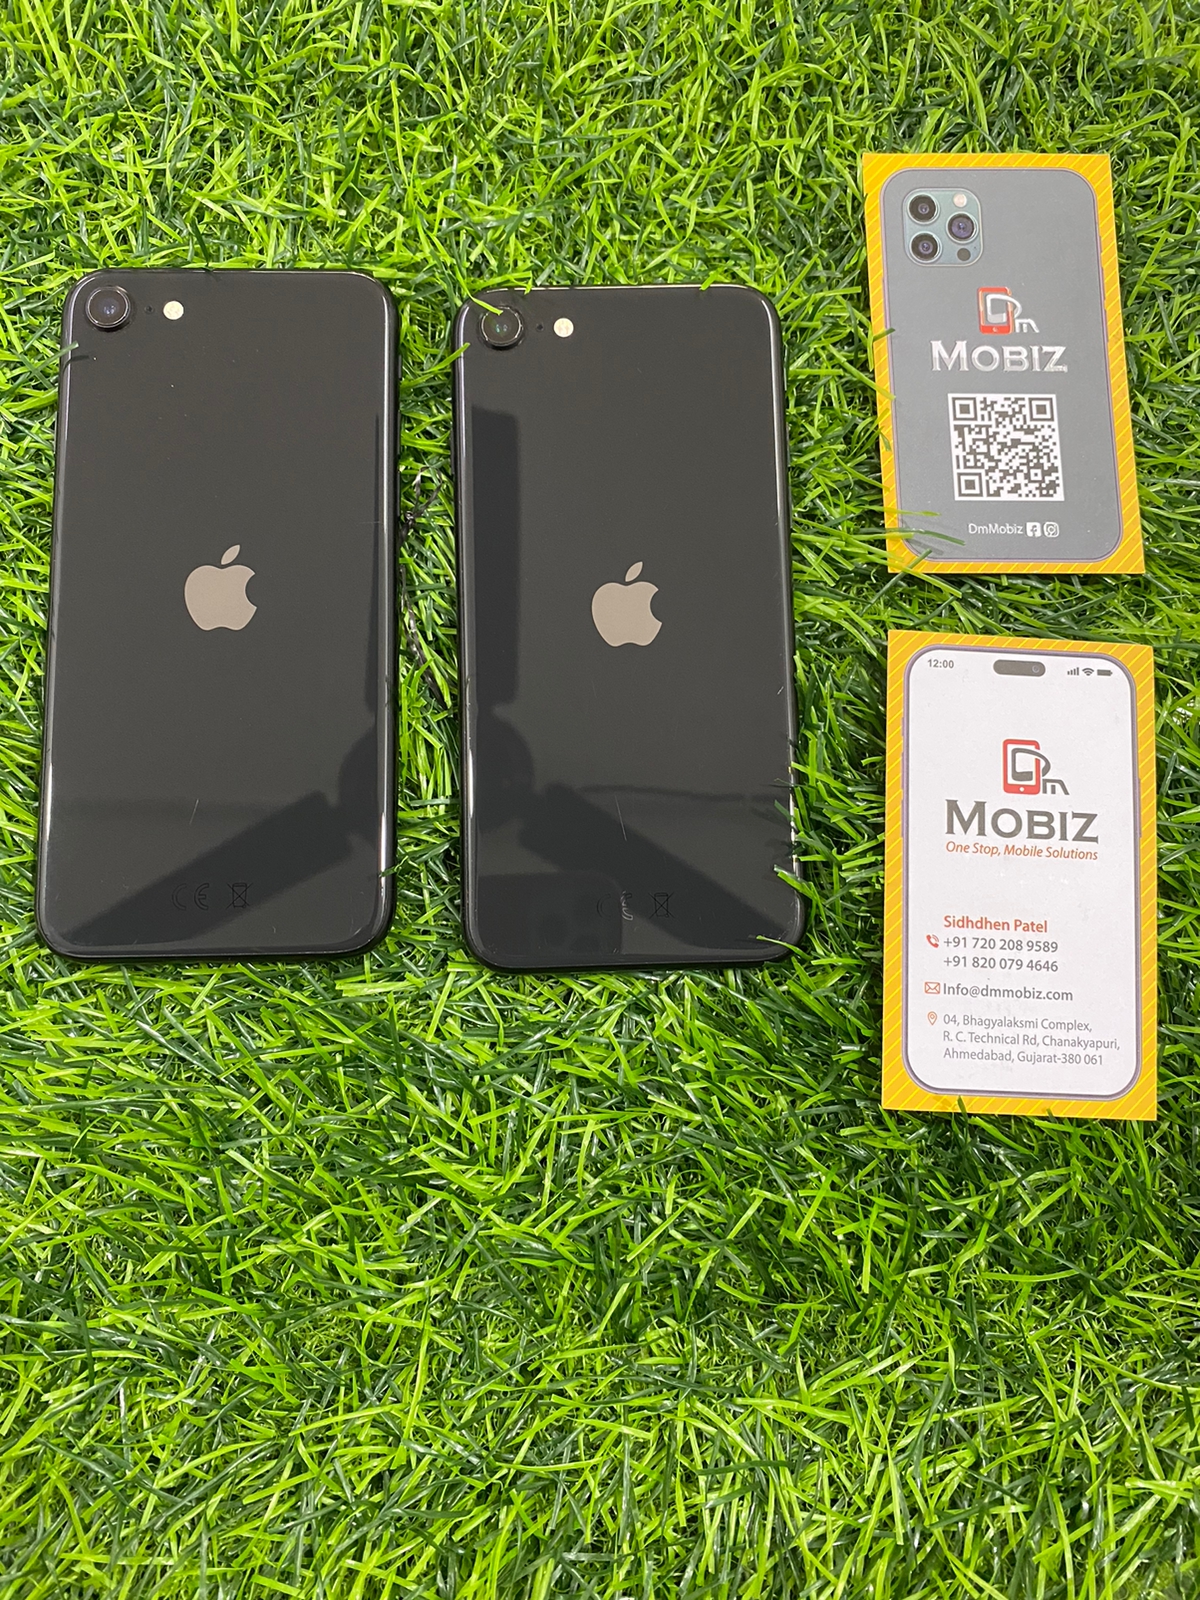 Details View - I phone SE photos - apple iphone se 2020,affordable smartphone india,iphone se 64gb price,emi option for iphone se,sleek and powerful smartphone,buy iphone se online,best budget phone india,apple warranty and bill,value for money smartphone,iconic design iphone se,reseller bazzar